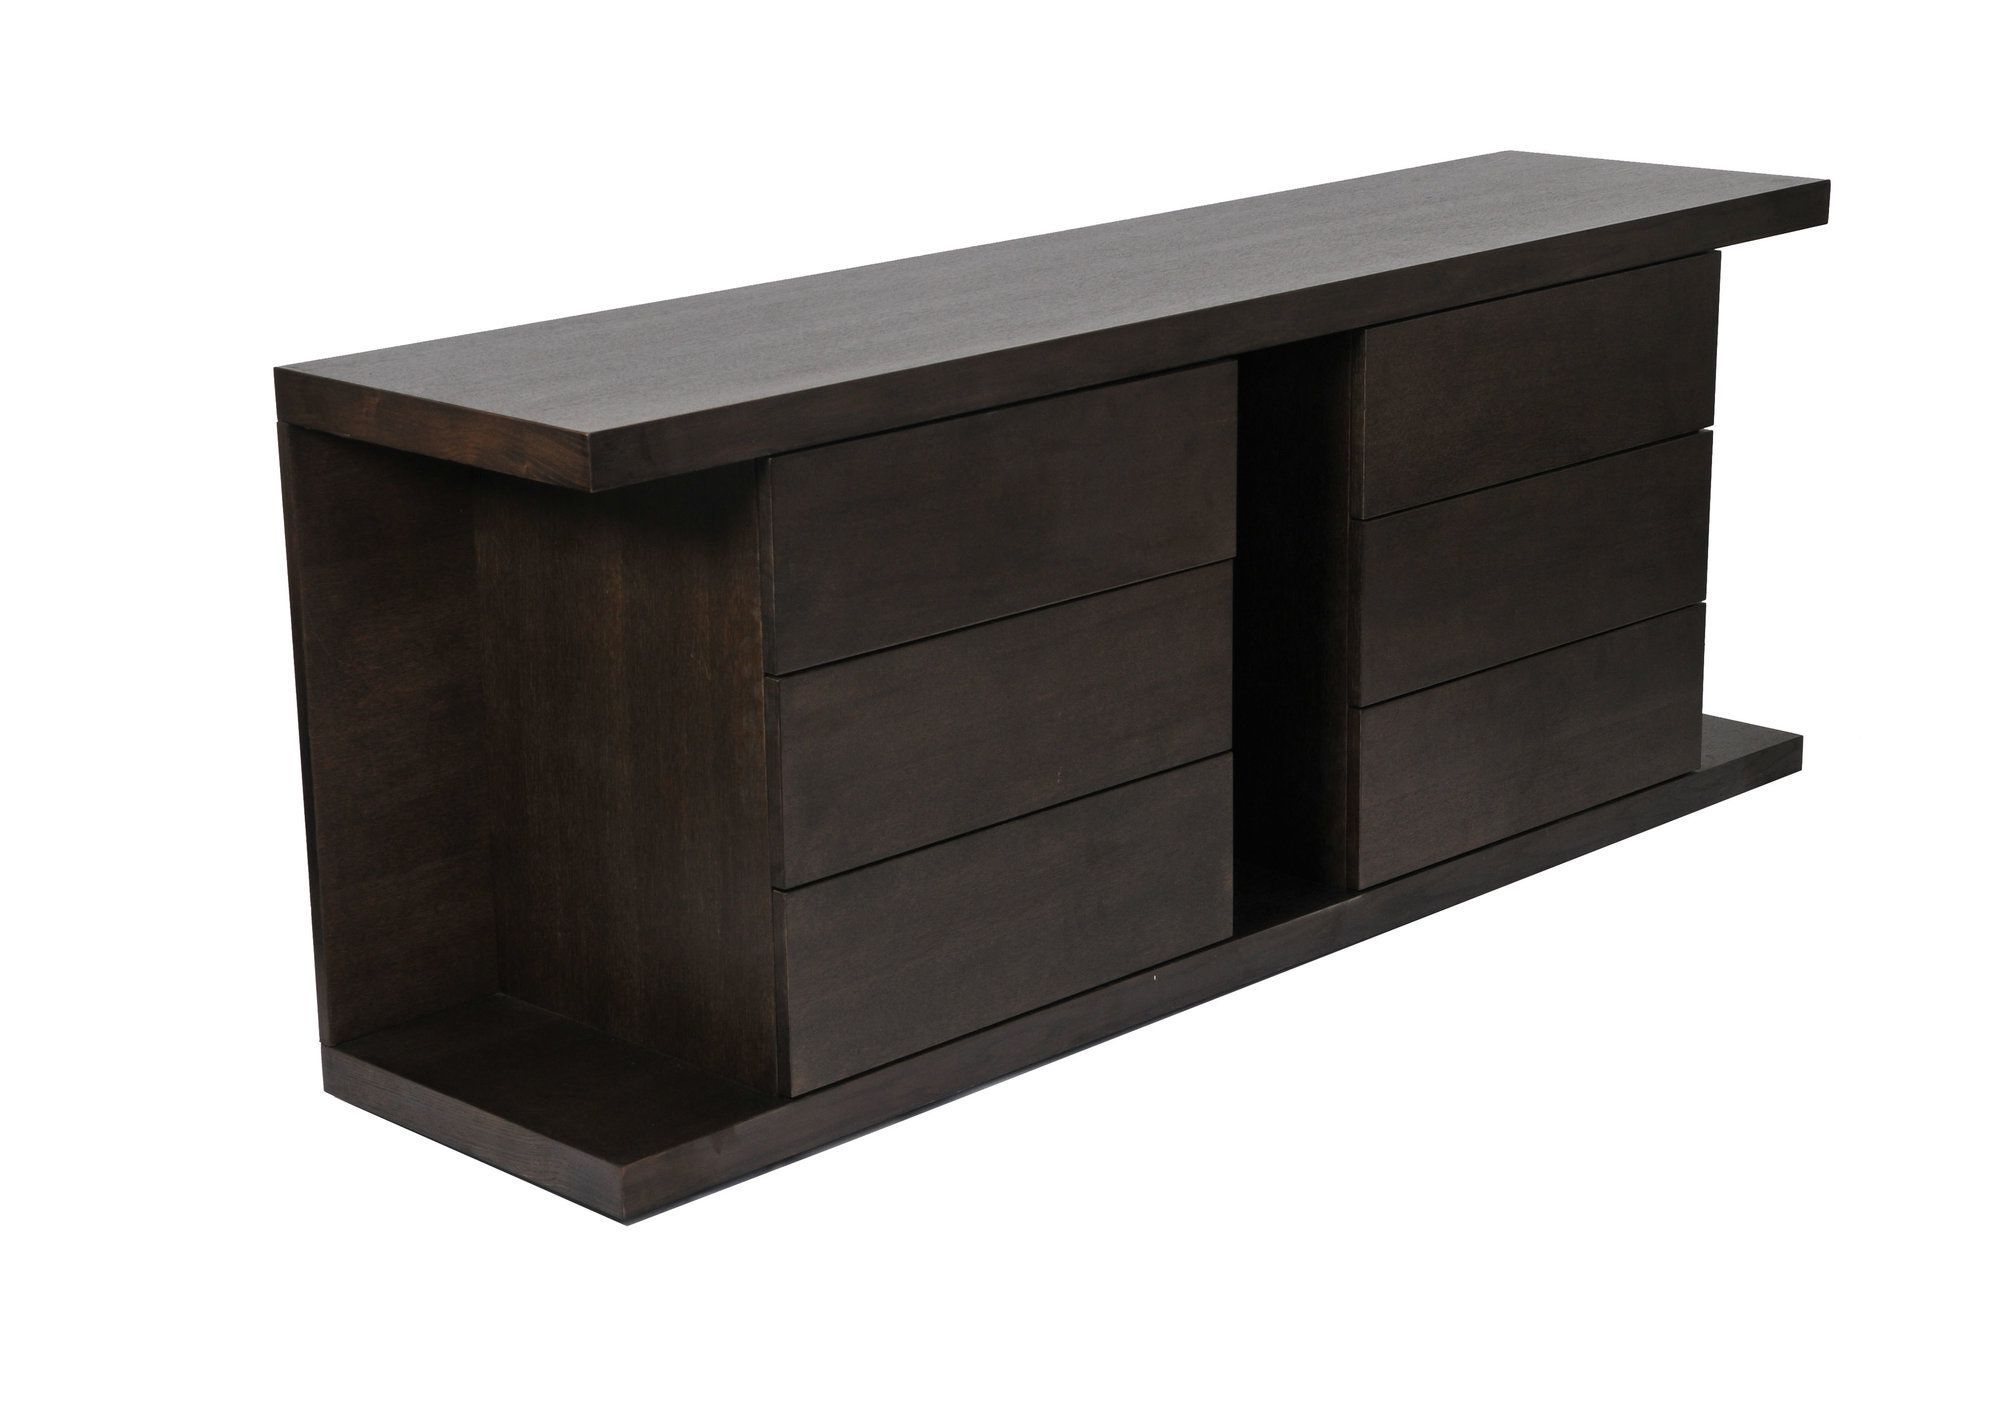 Thite Sideboard | Products | Dining Buffet, Sideboard With Regard To Thite Sideboards (View 2 of 20)